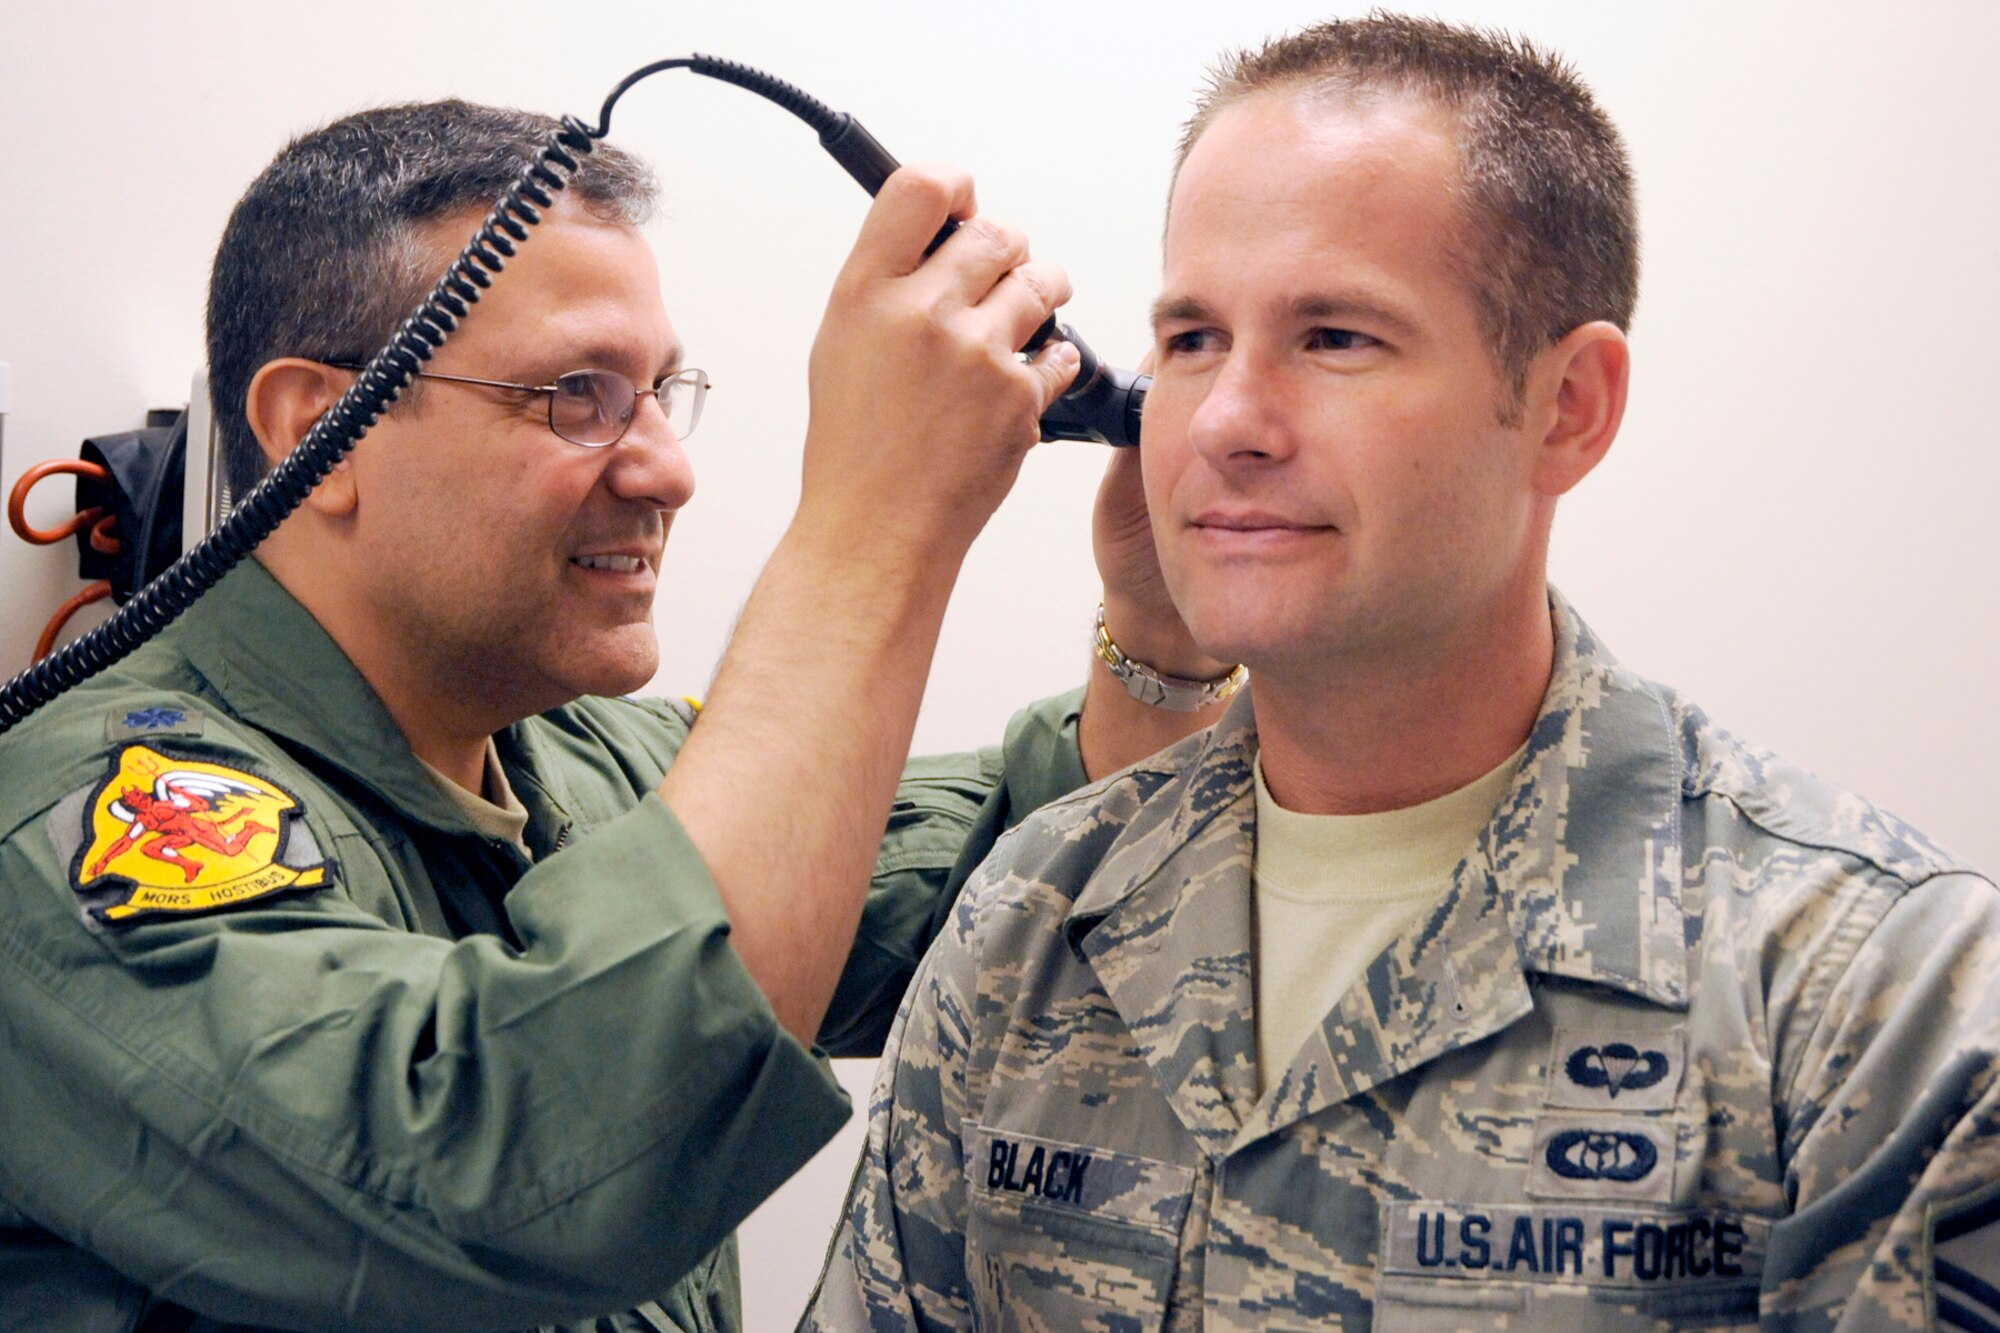 130725-Z-HC784-041 – Lt. Col. Dr. Ralph Torres, a physician with the 127th Medical Group, performs an ear examination on Master Sgt. Kyle Black at Selfridge Air National Guard Base, July 25, 2013. The 127th Medical Group is charged with maintaining the medical readiness of nearly 1,700 Citizen-Airmen in the Michigan Air National Guard. (U.S. Air National Guard photo by John S. Swanson/Released)